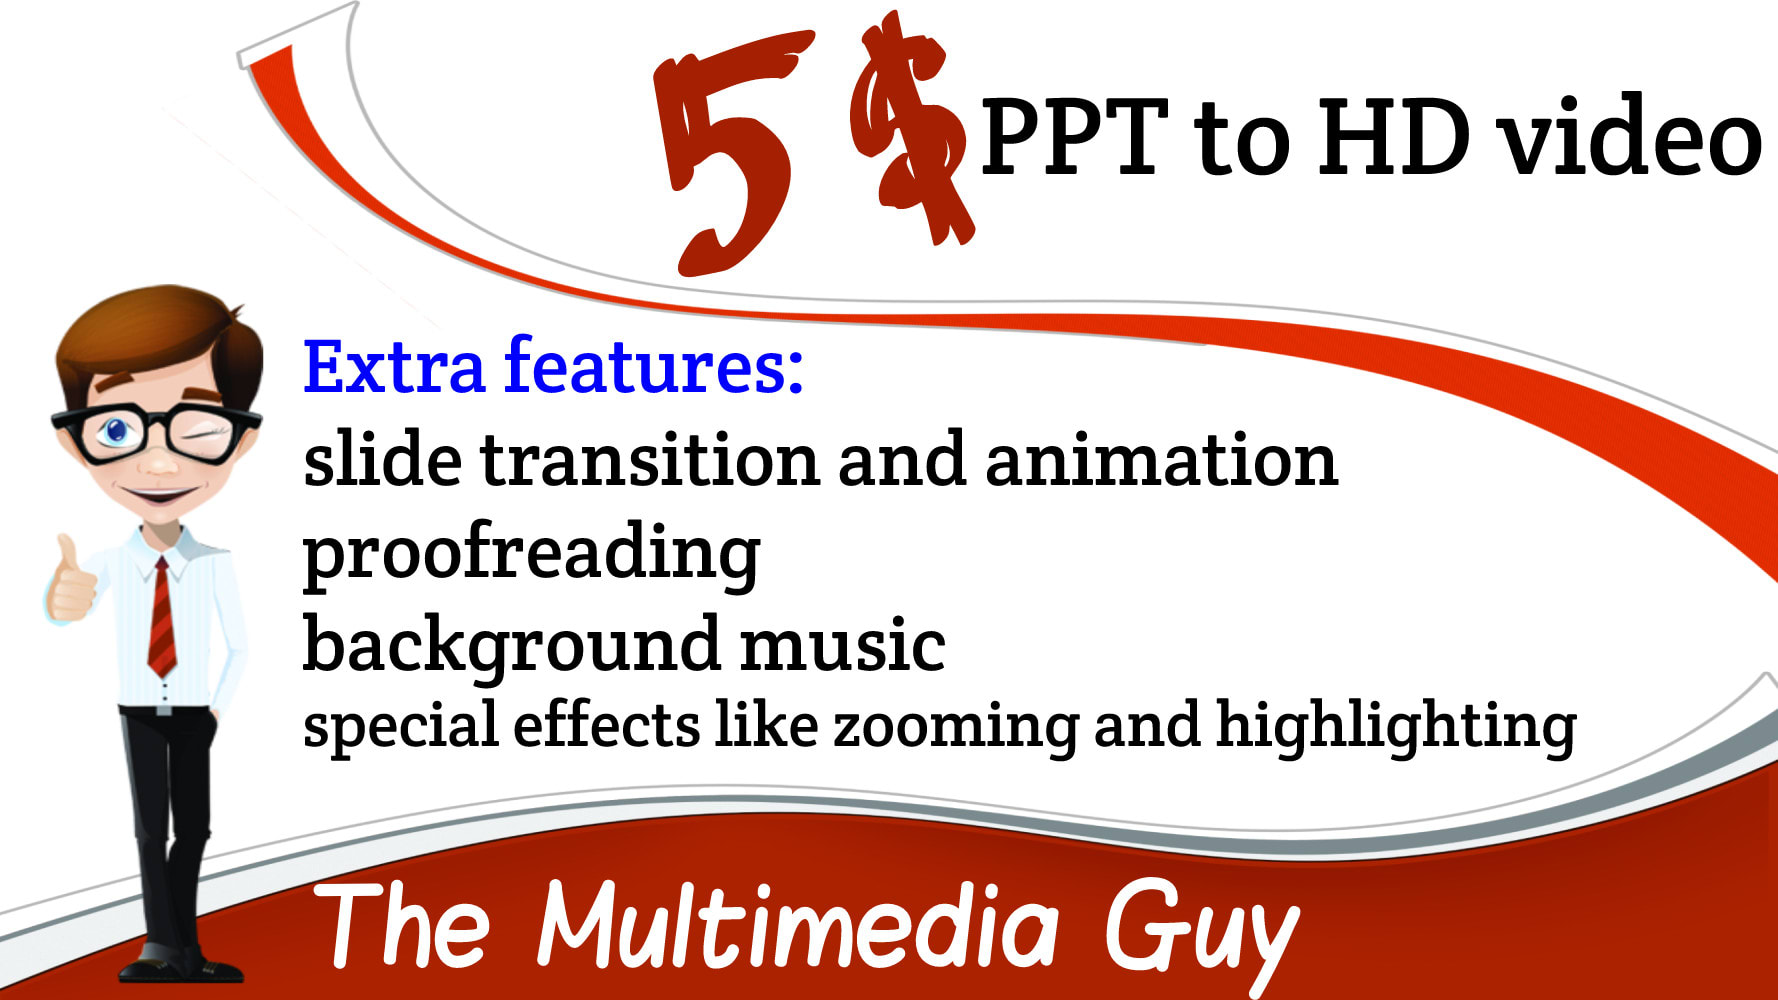 Convert powerpoint slides to hd video with audio narration by Samer_taha |  Fiverr